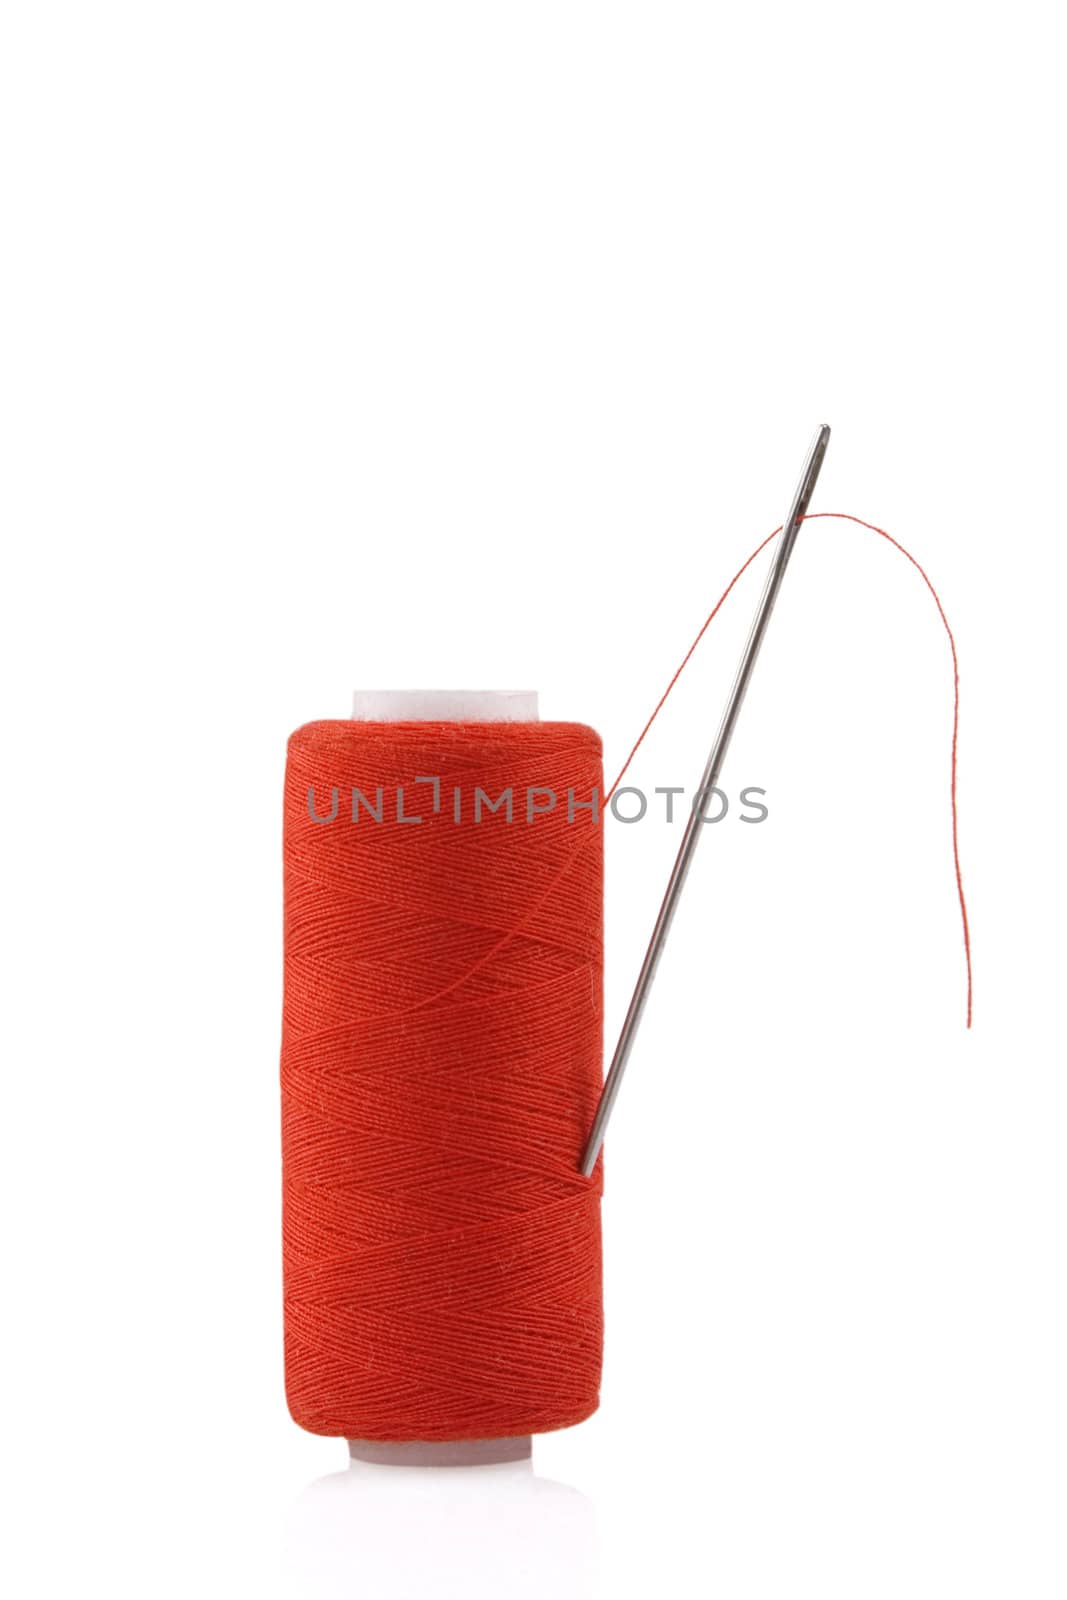 red spool with needle isolated on white background